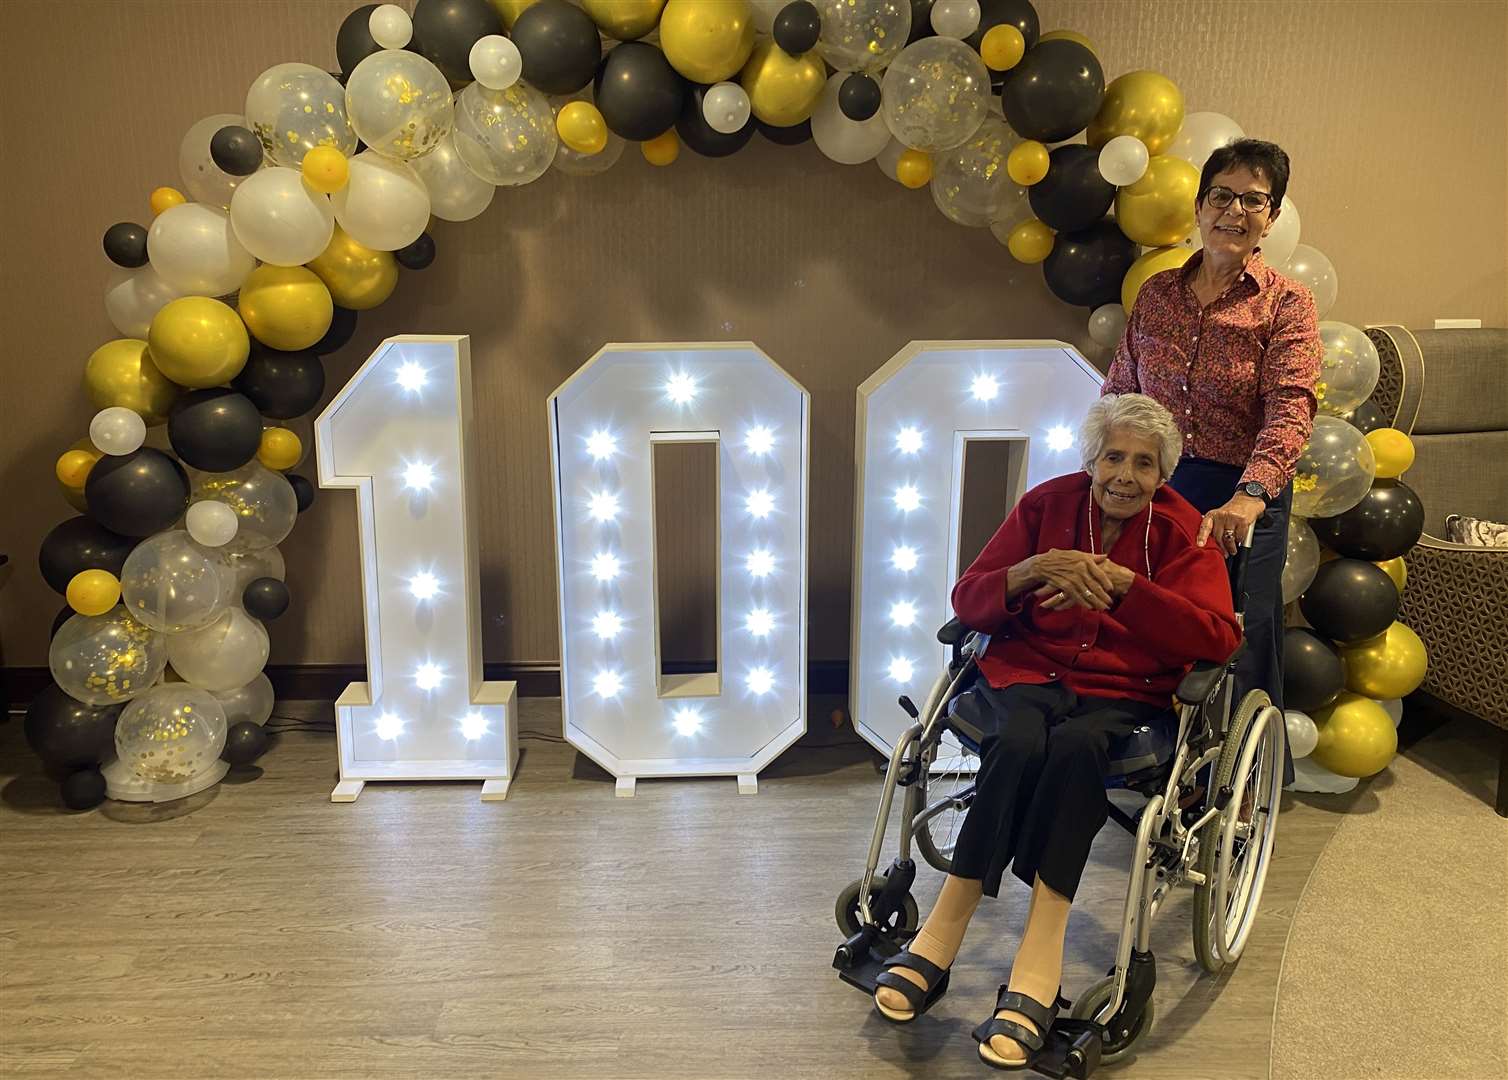 Madge Lumley turned 100-years-old last week at Invicta Court in Maidstone